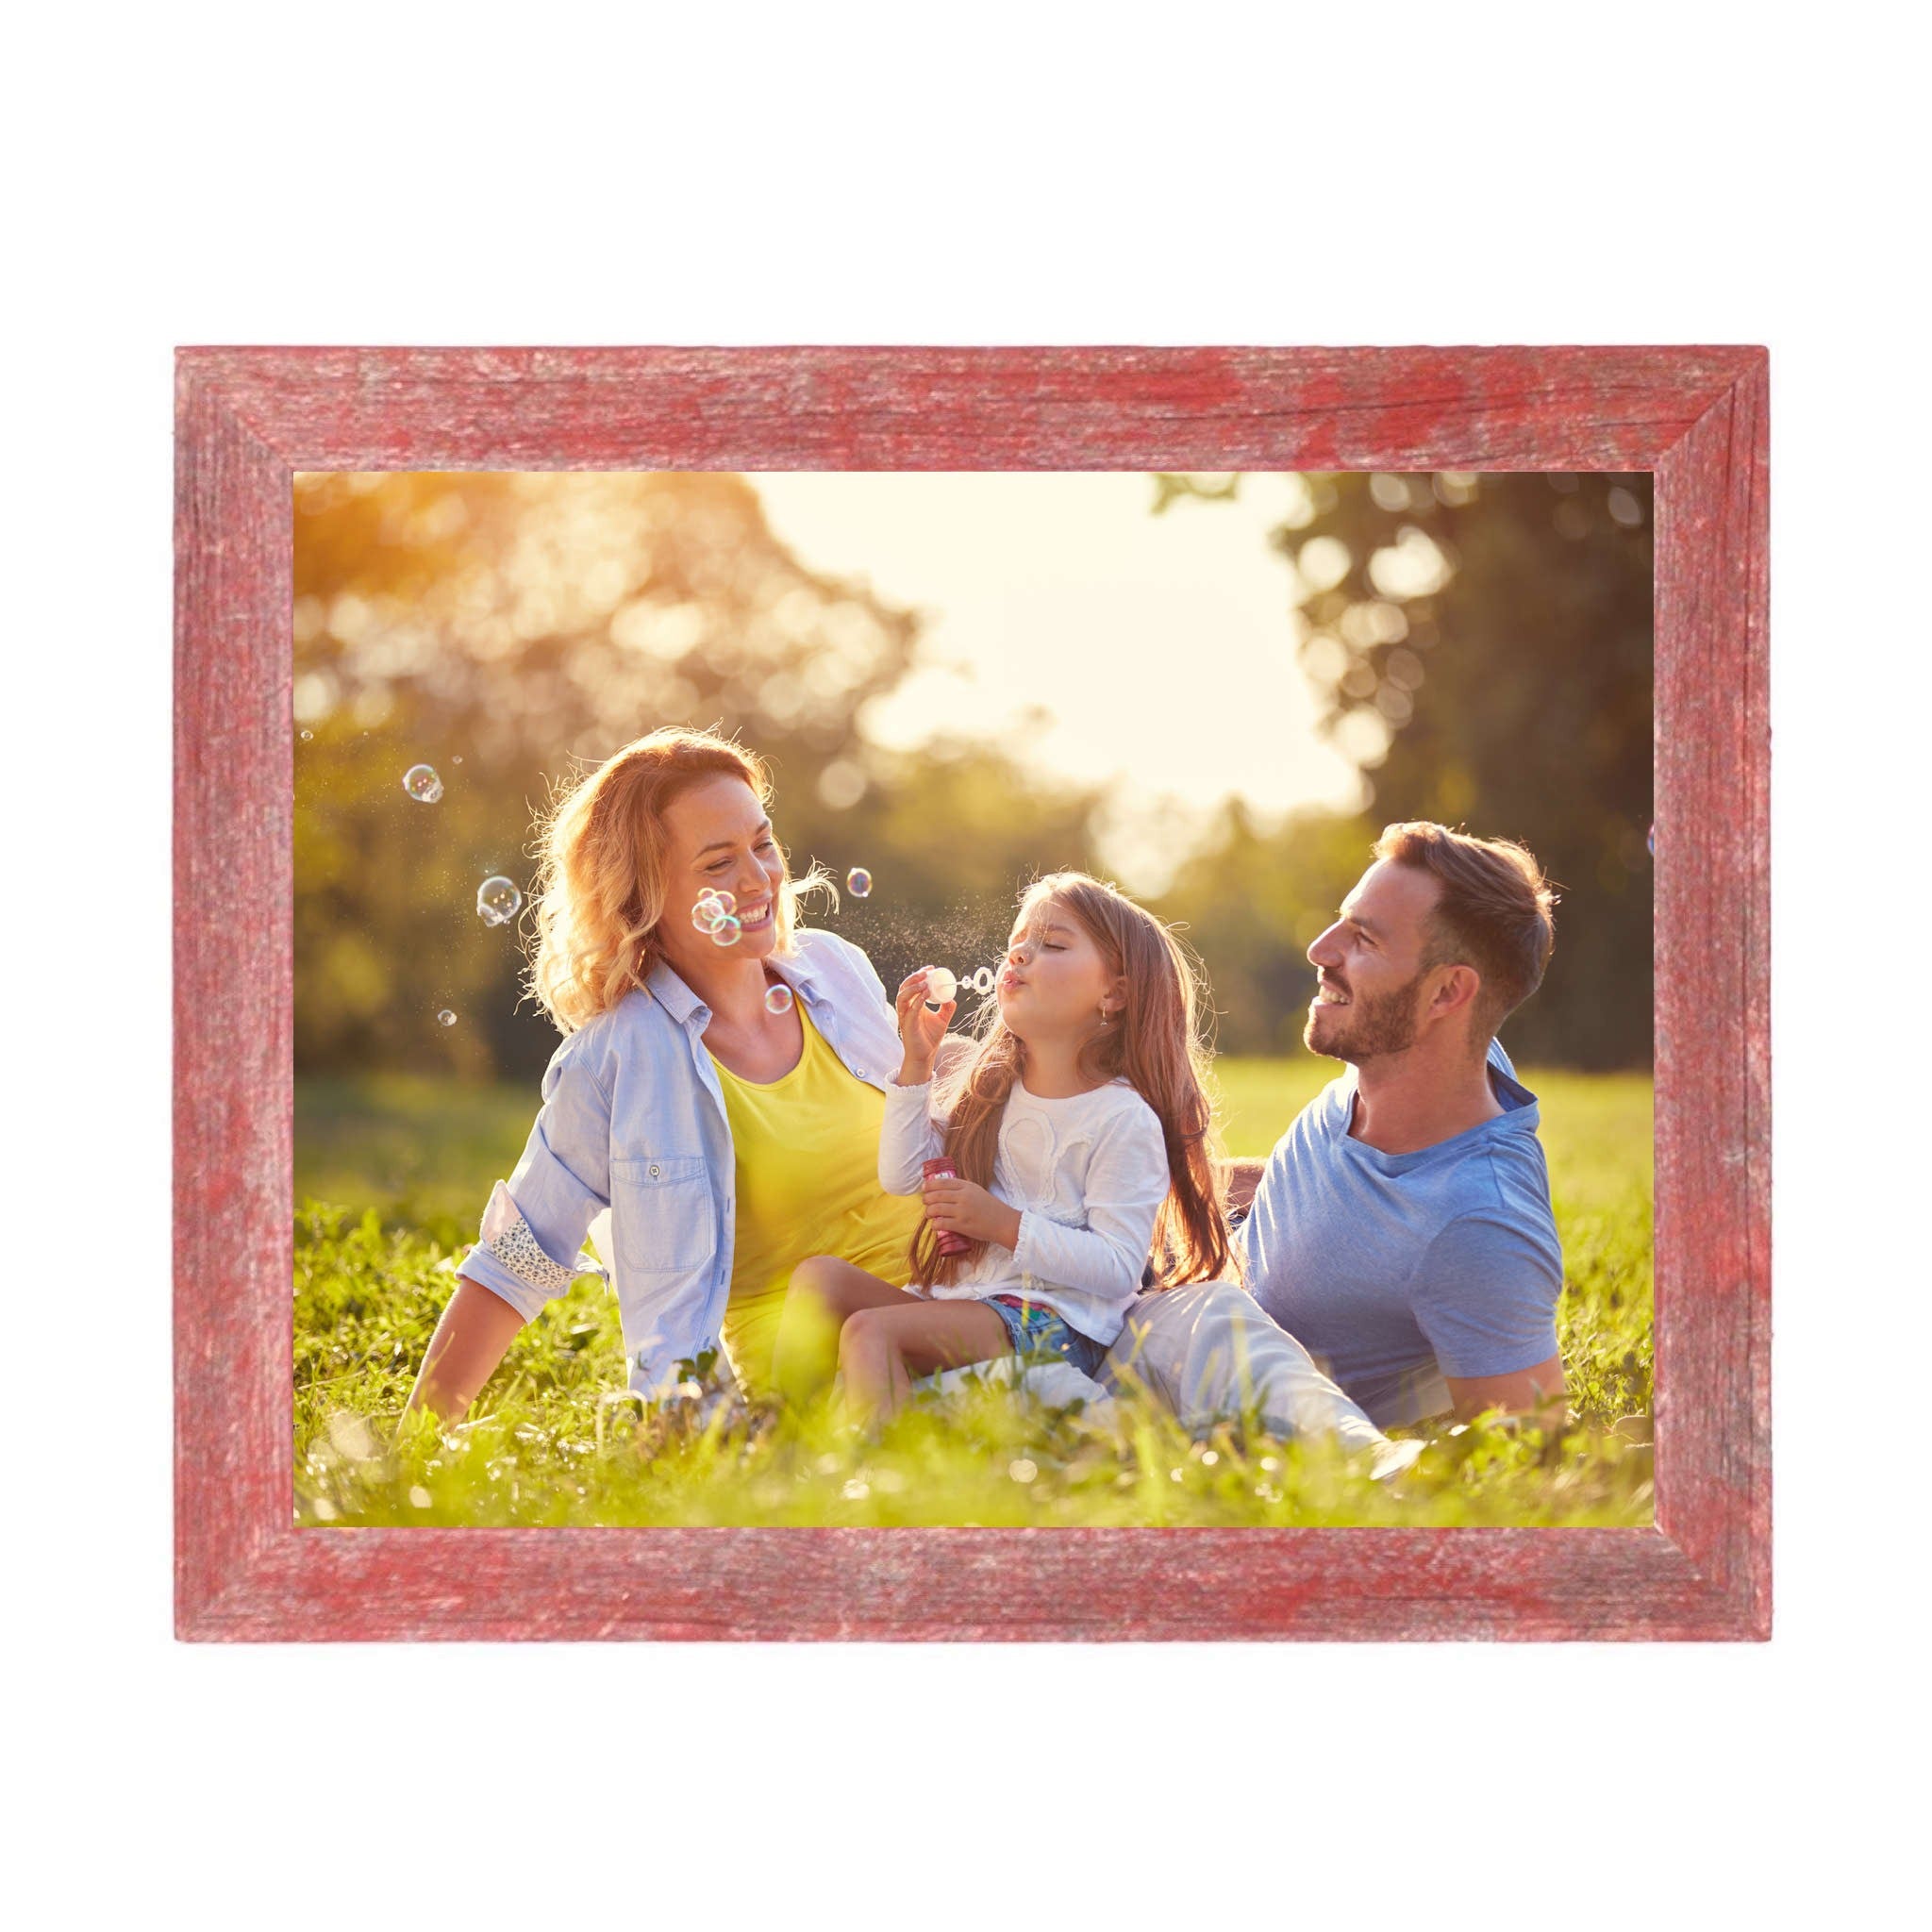 Rustic Farmhouse Red Wood Frame | 12